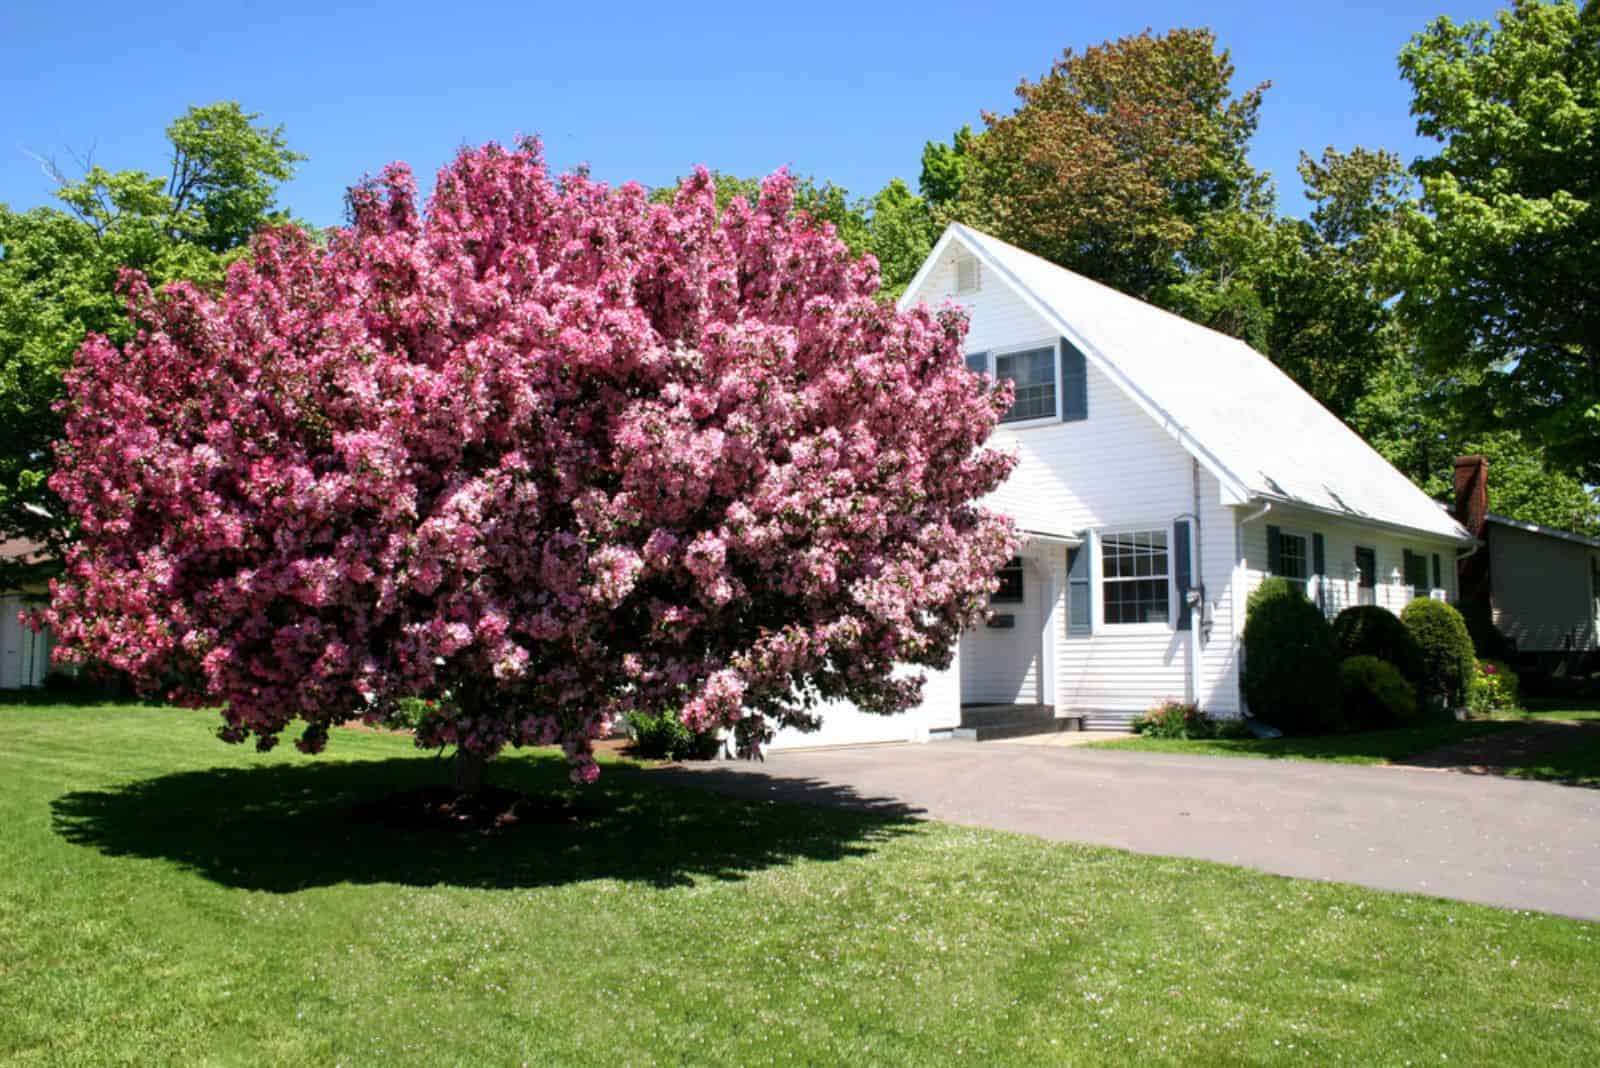 The Best Trees To Plant Near House & Which To Avoid